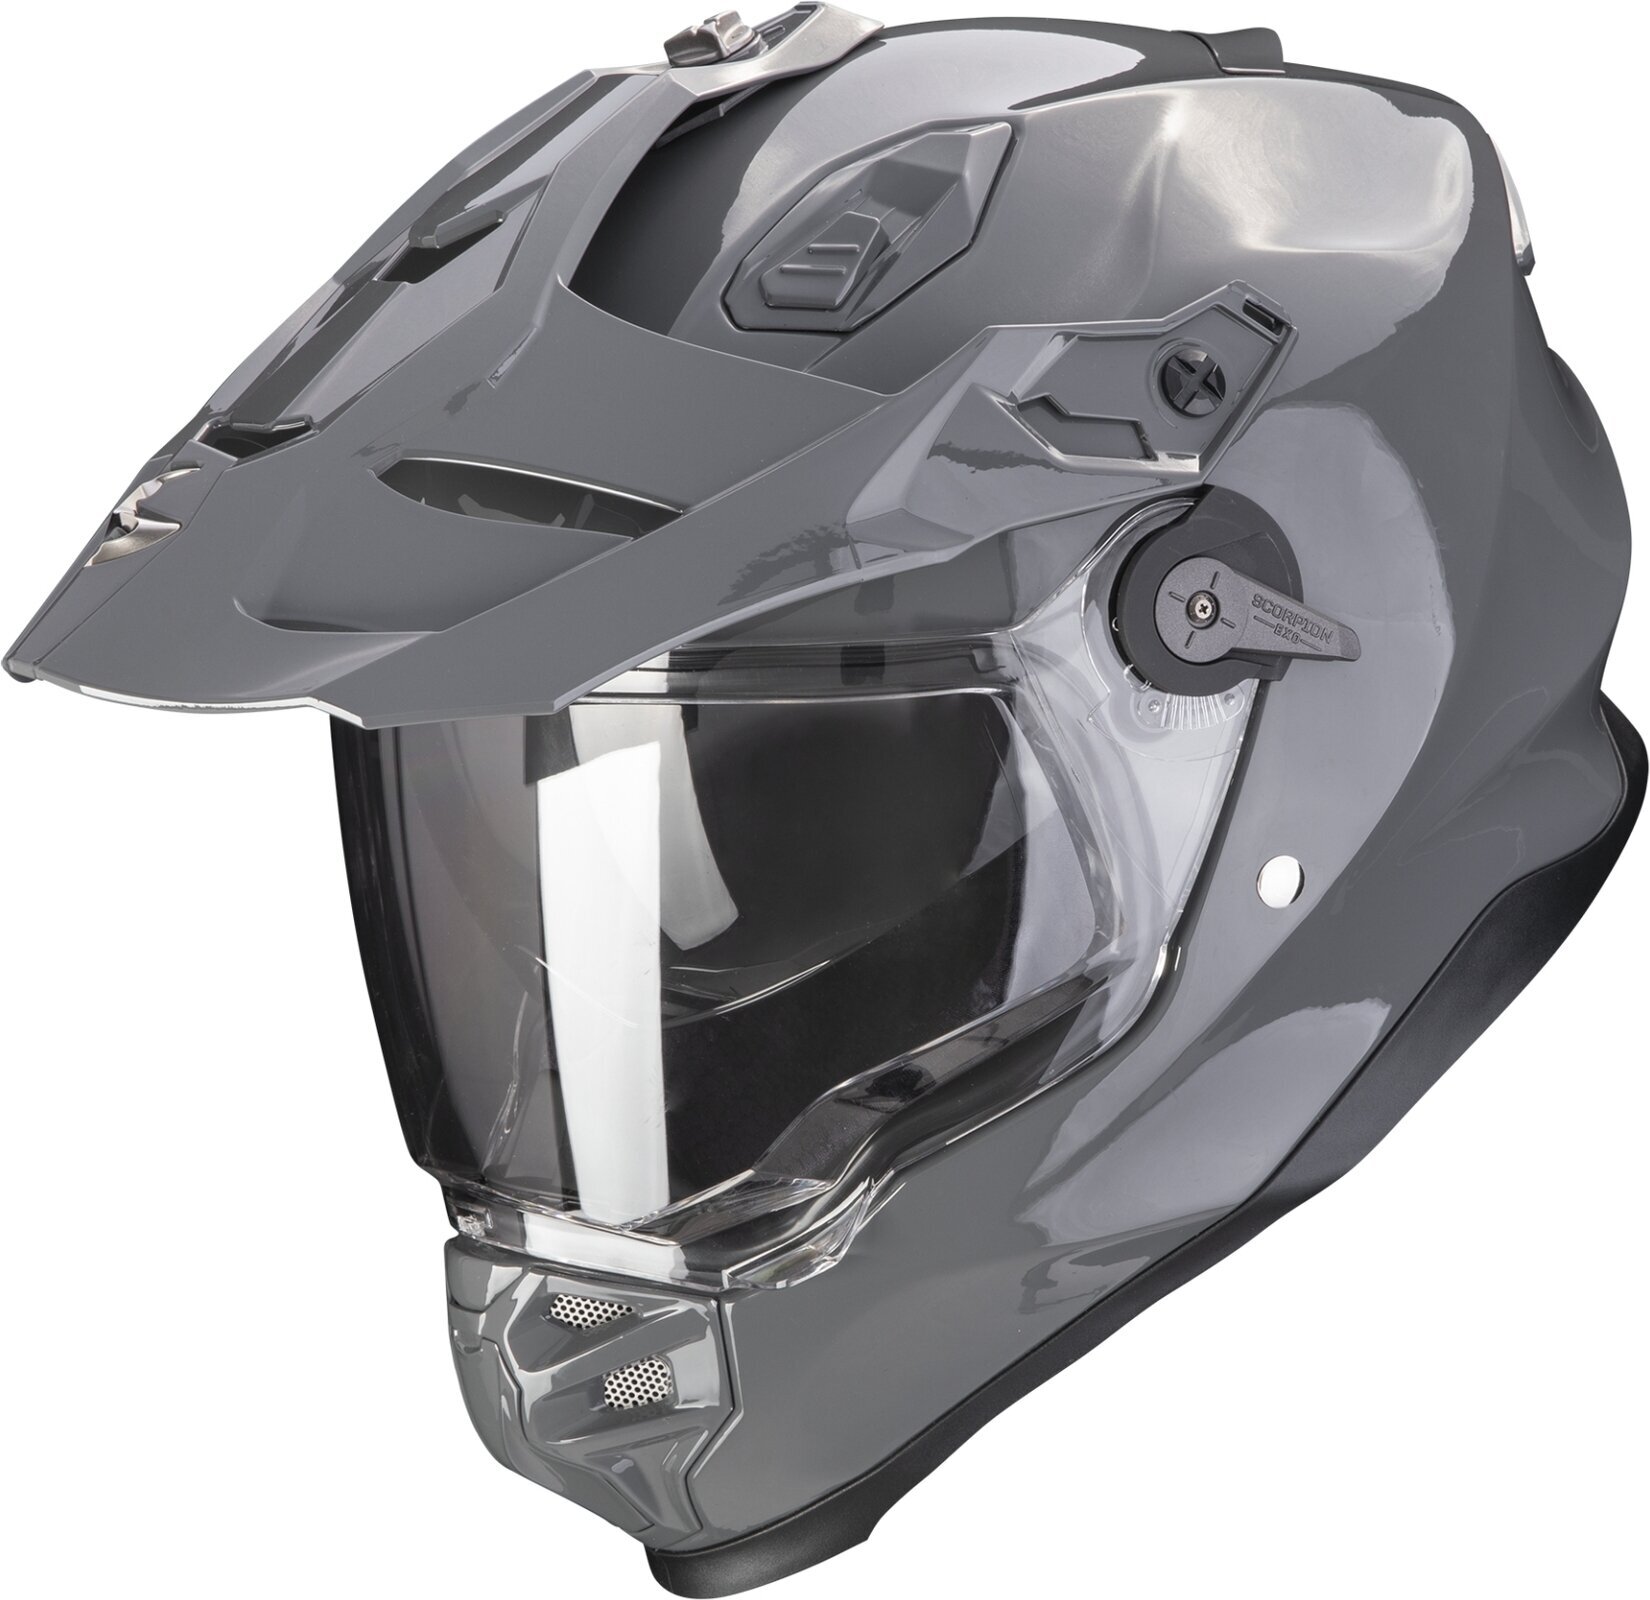 Helm Scorpion ADF-9000 AIR SOLID Cement Grey M Helm